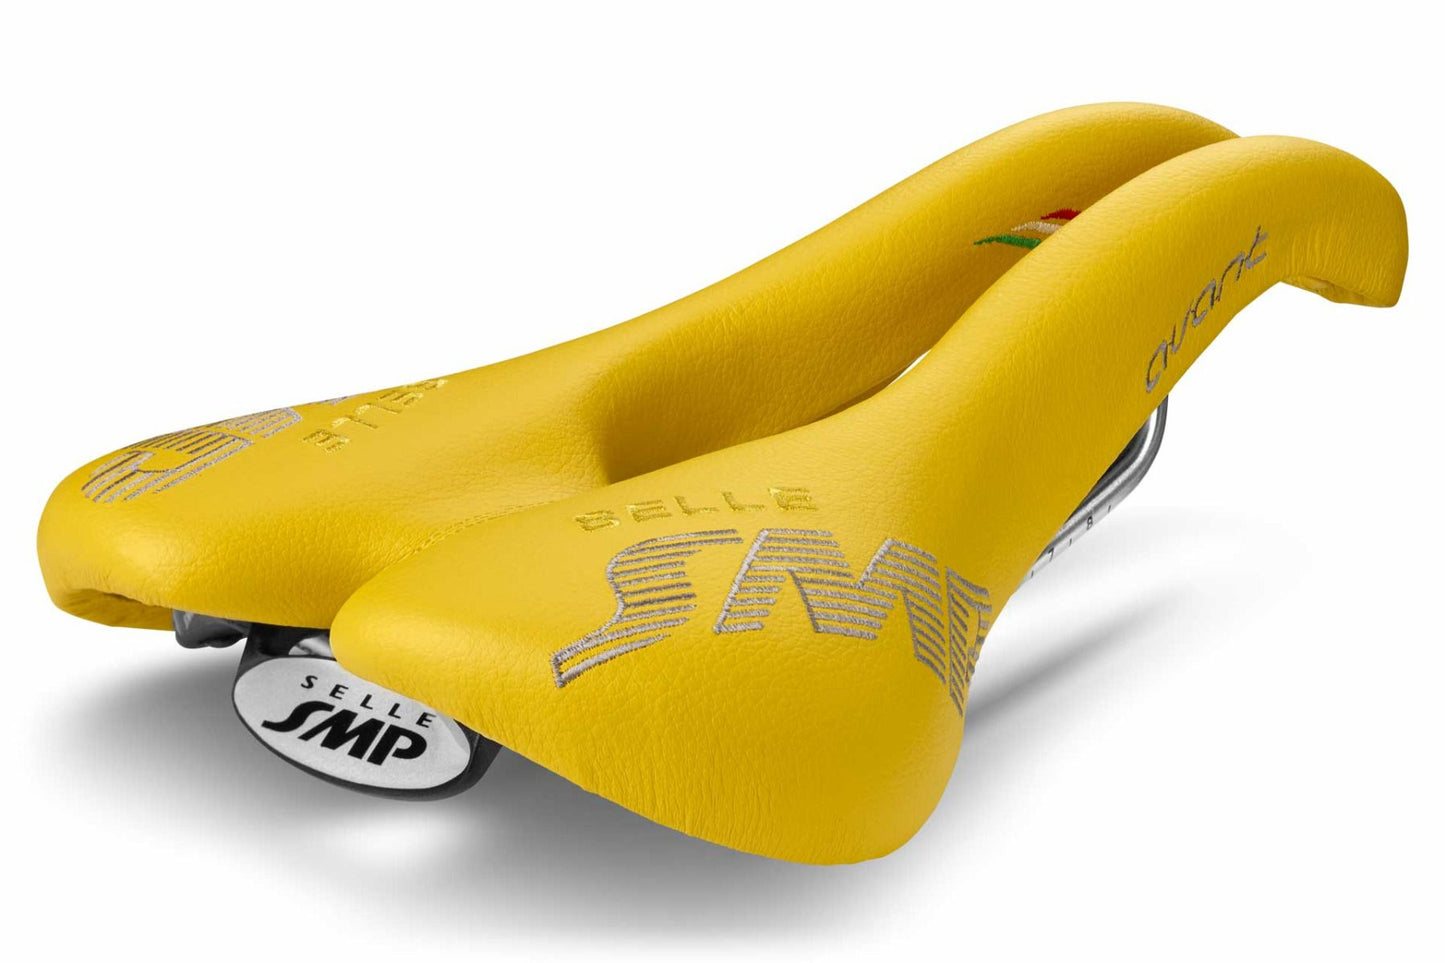 Selle SMP Avant Saddle with Stainless Steel Rails (Yellow)